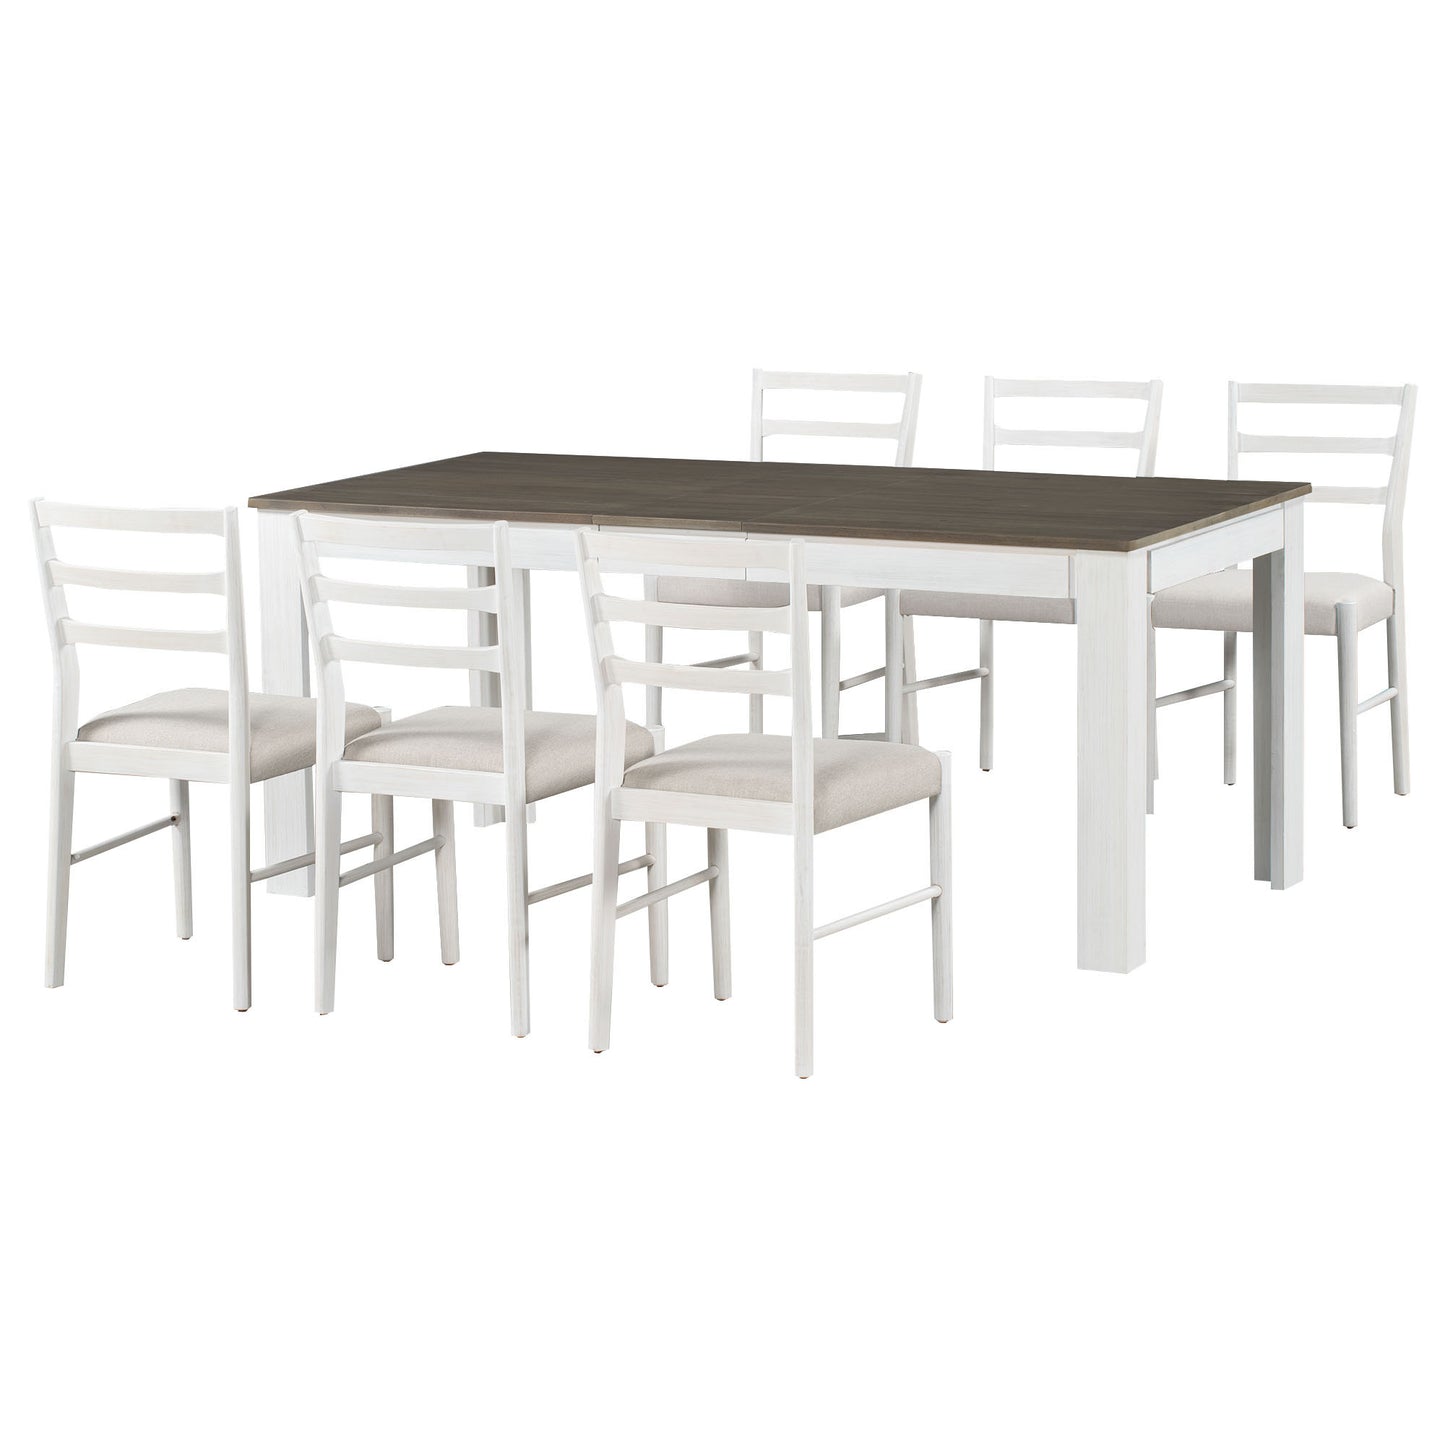 TREXM 7-Piece Wooden Dining Table Set Brown + White